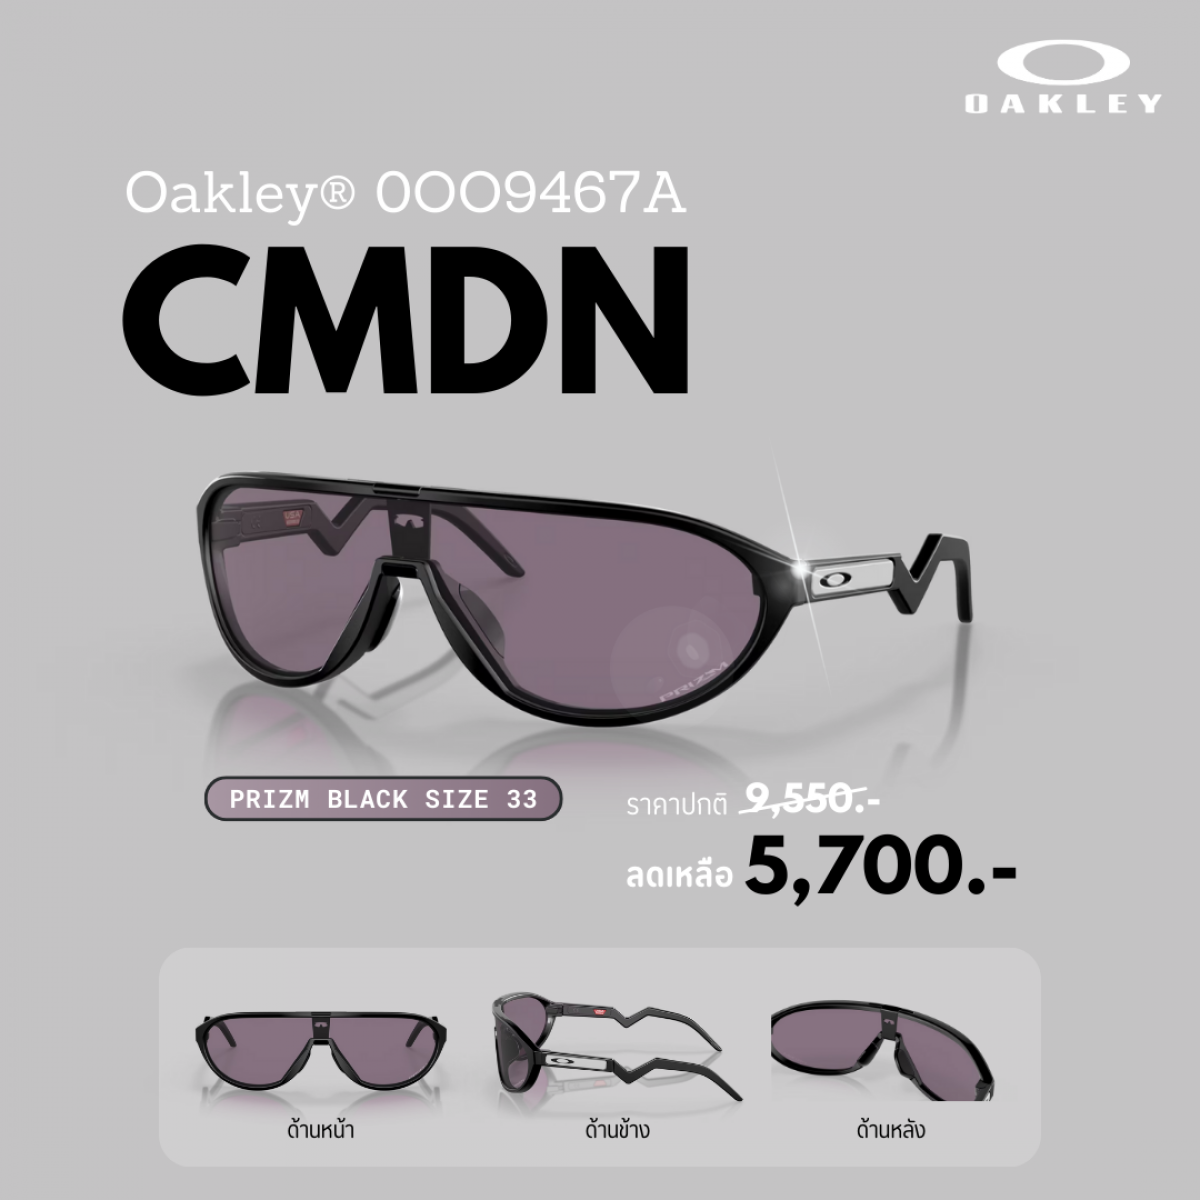 SUNGLASSES_WITH_CASE_0OO9406A_PRIZM_GREY_SIZE_37_(4)